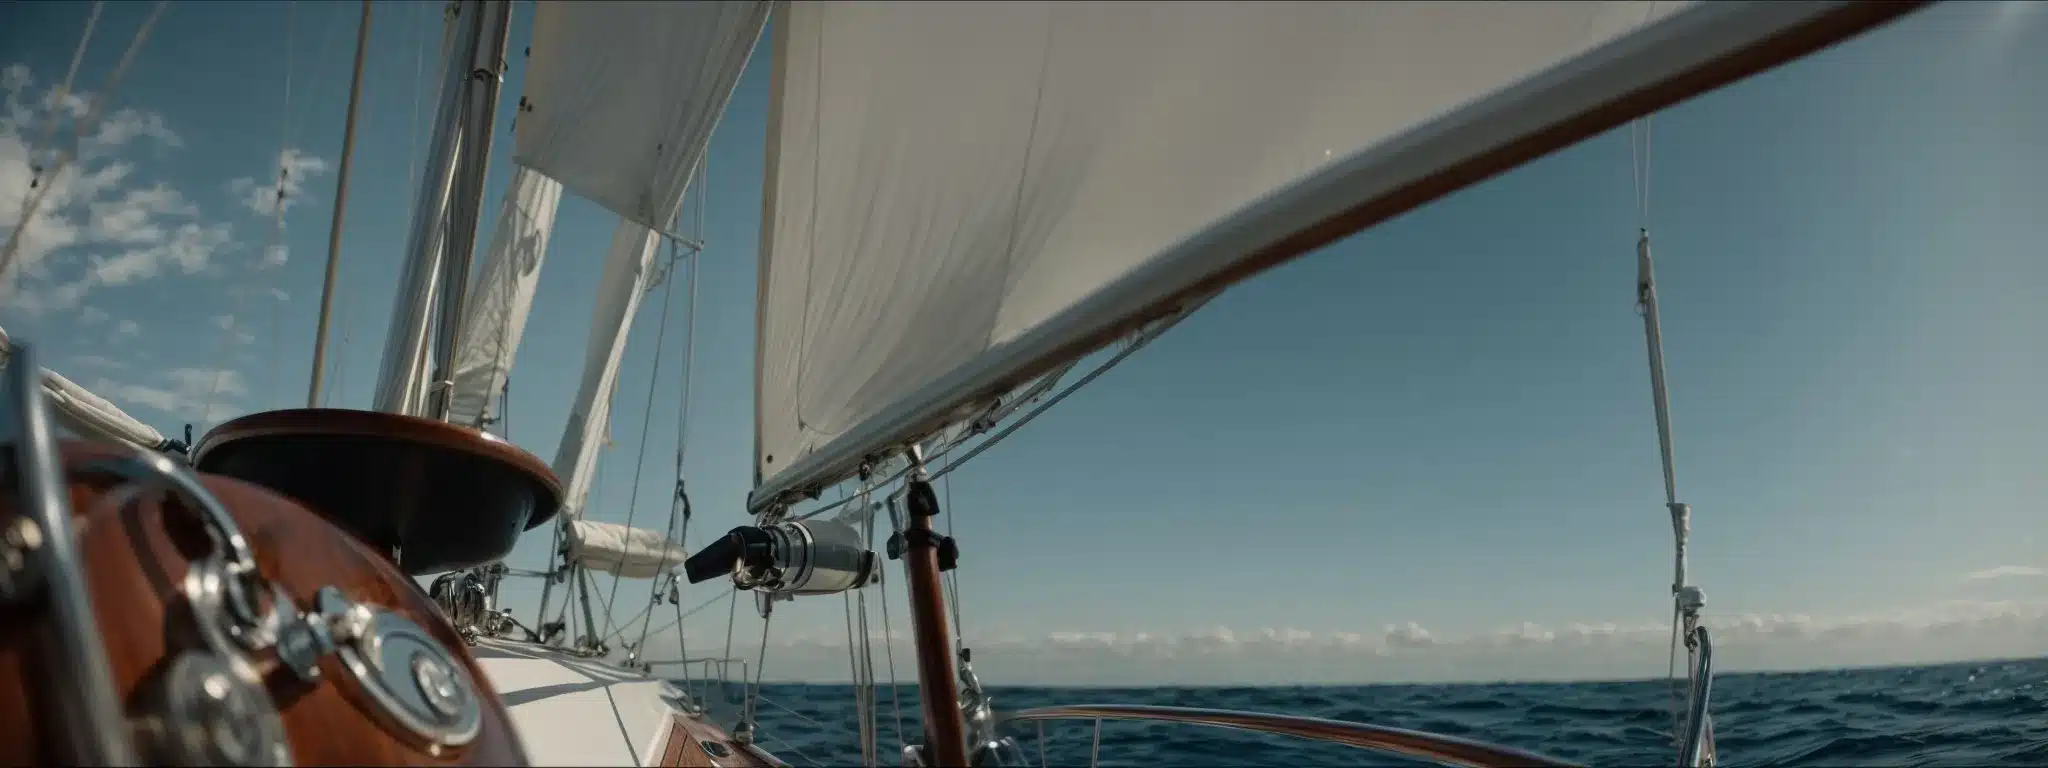 A Captain Stands At The Helm Of A Sailboat, Navigating Through A Clear Blue Sea Under A Wide-Open Sky.